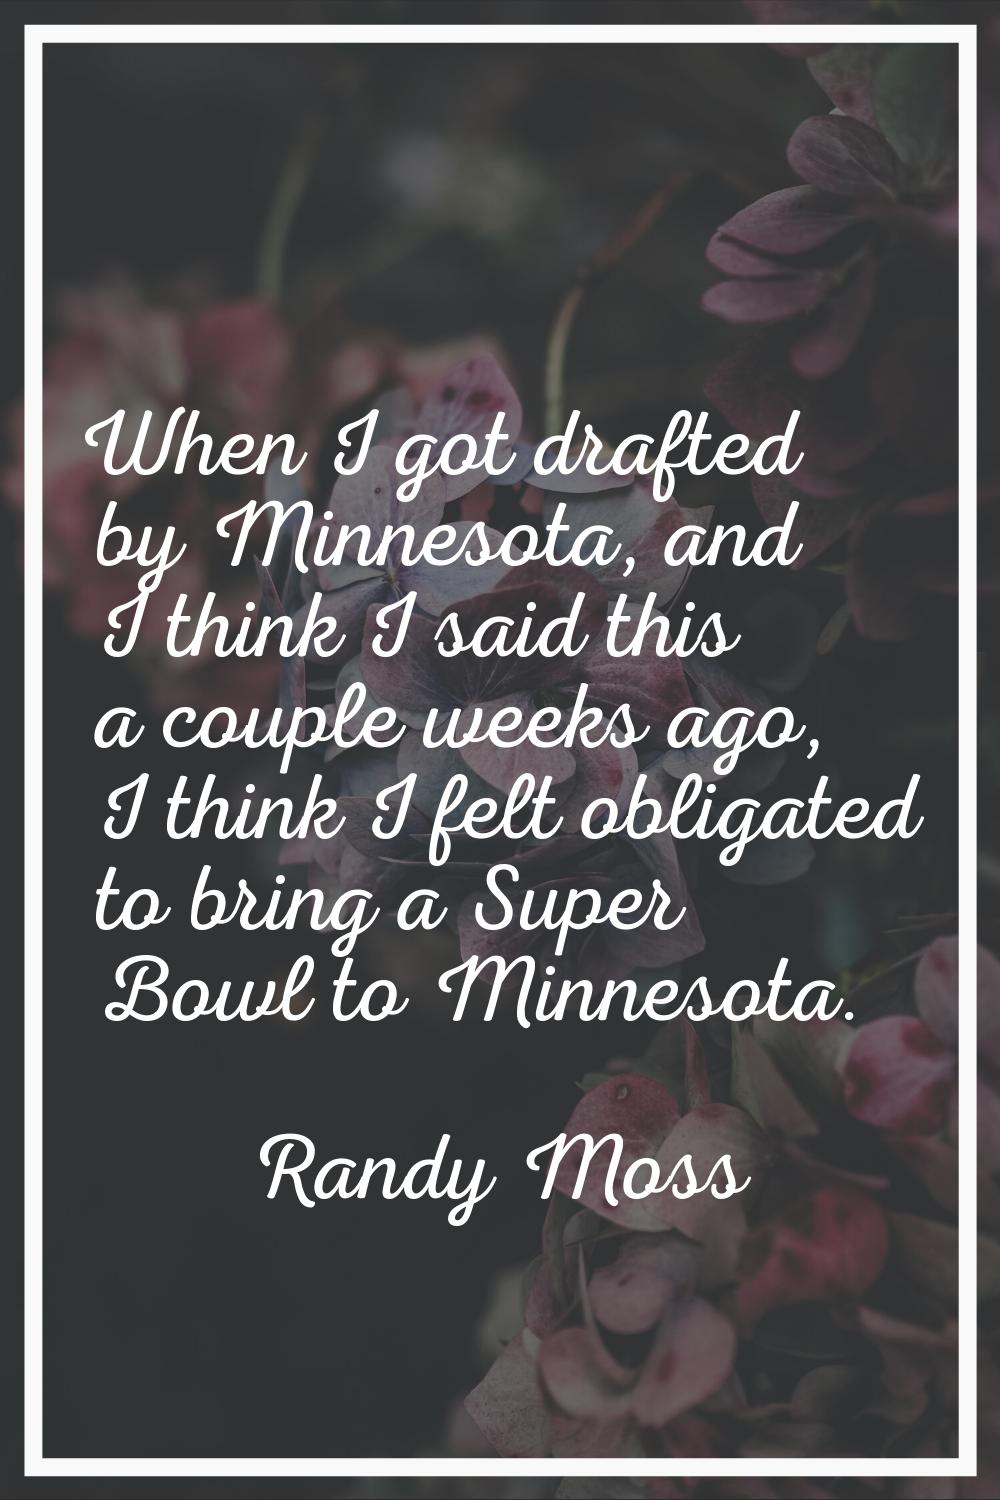 When I got drafted by Minnesota, and I think I said this a couple weeks ago, I think I felt obligat